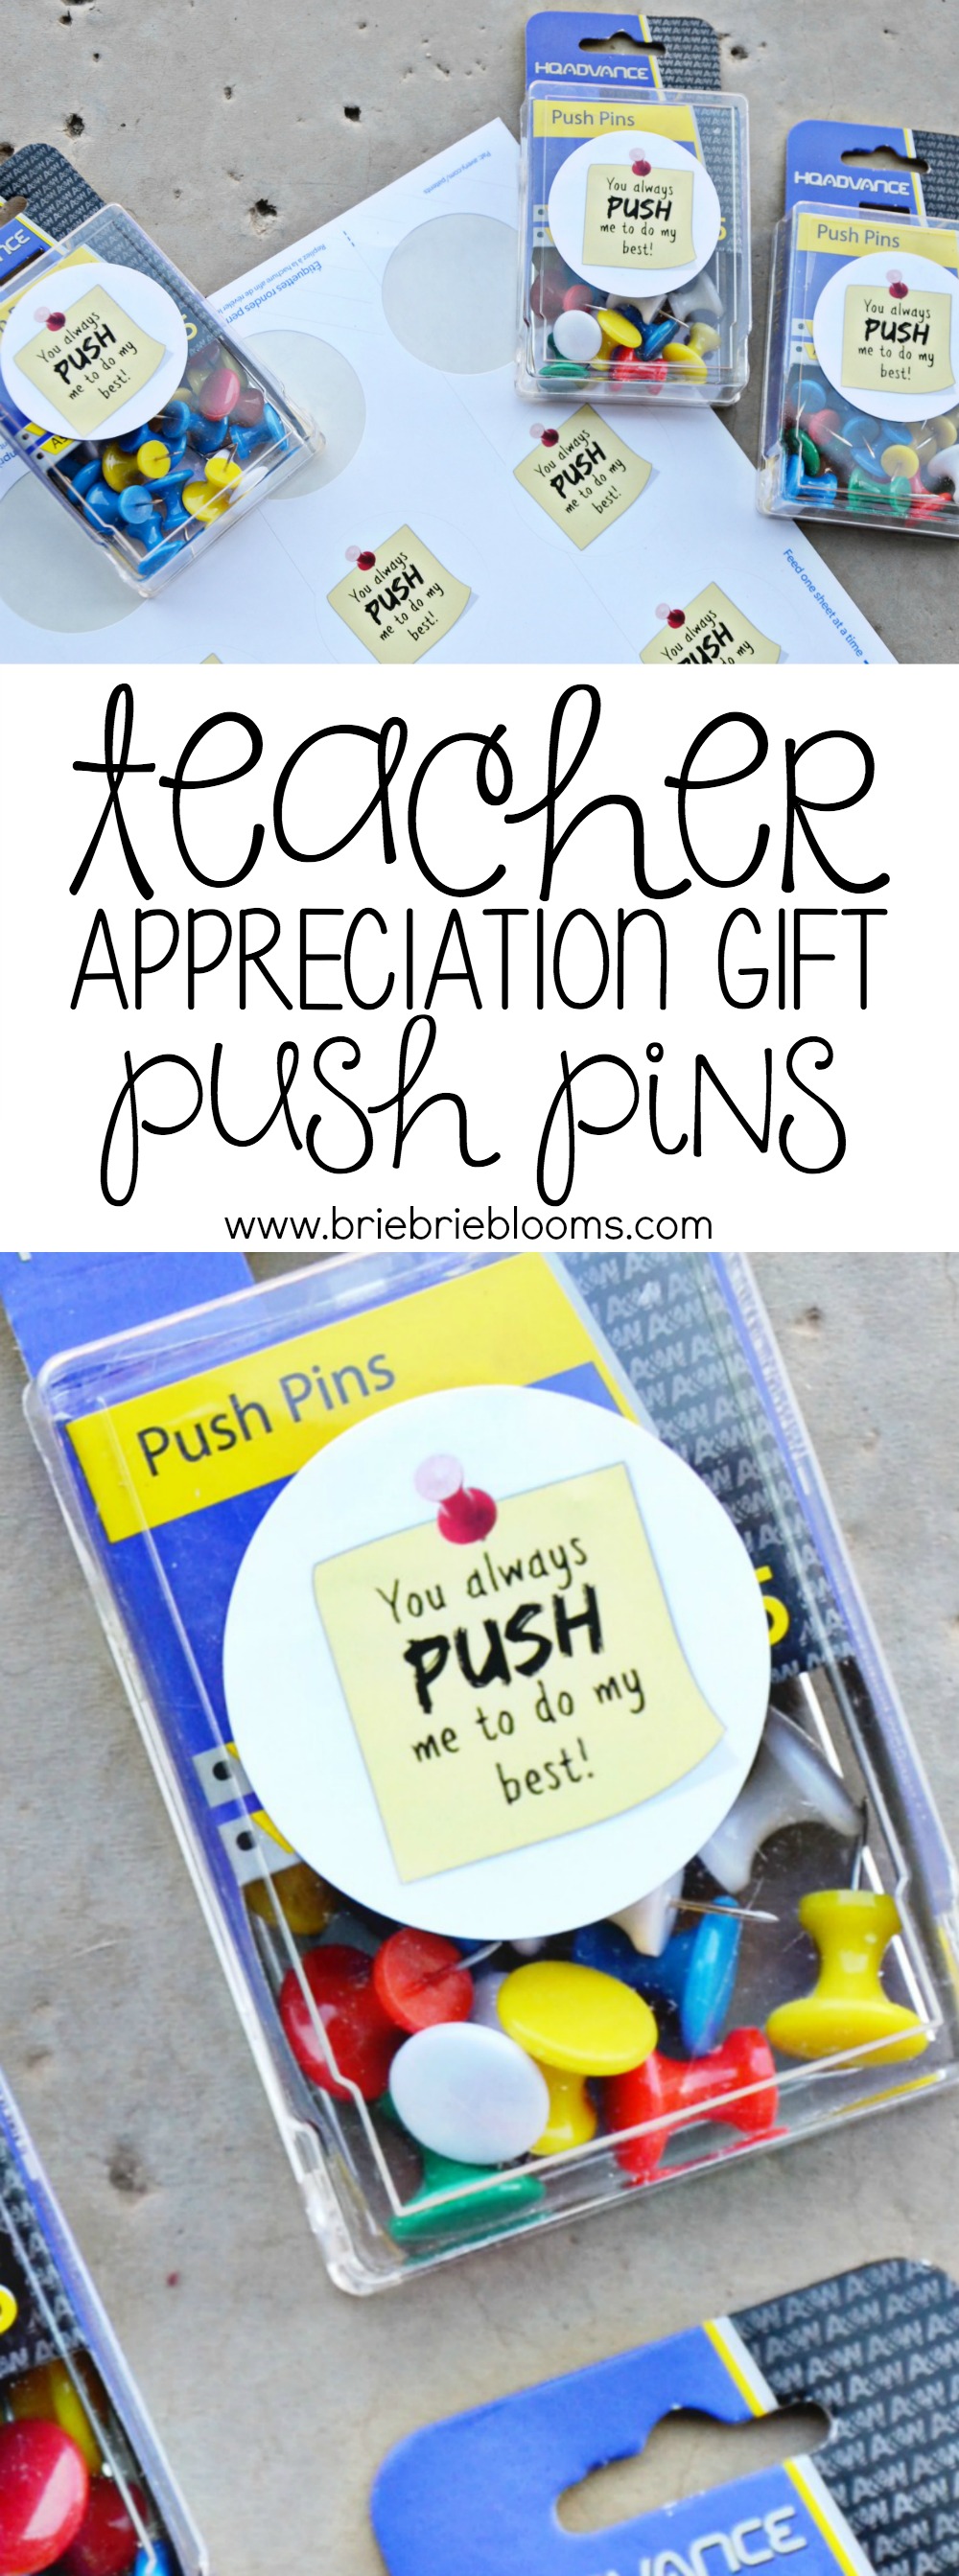 Use this fun printable compliment label to make an easy teacher appreciation gift. The push pins gift are a great way to thank a teacher.